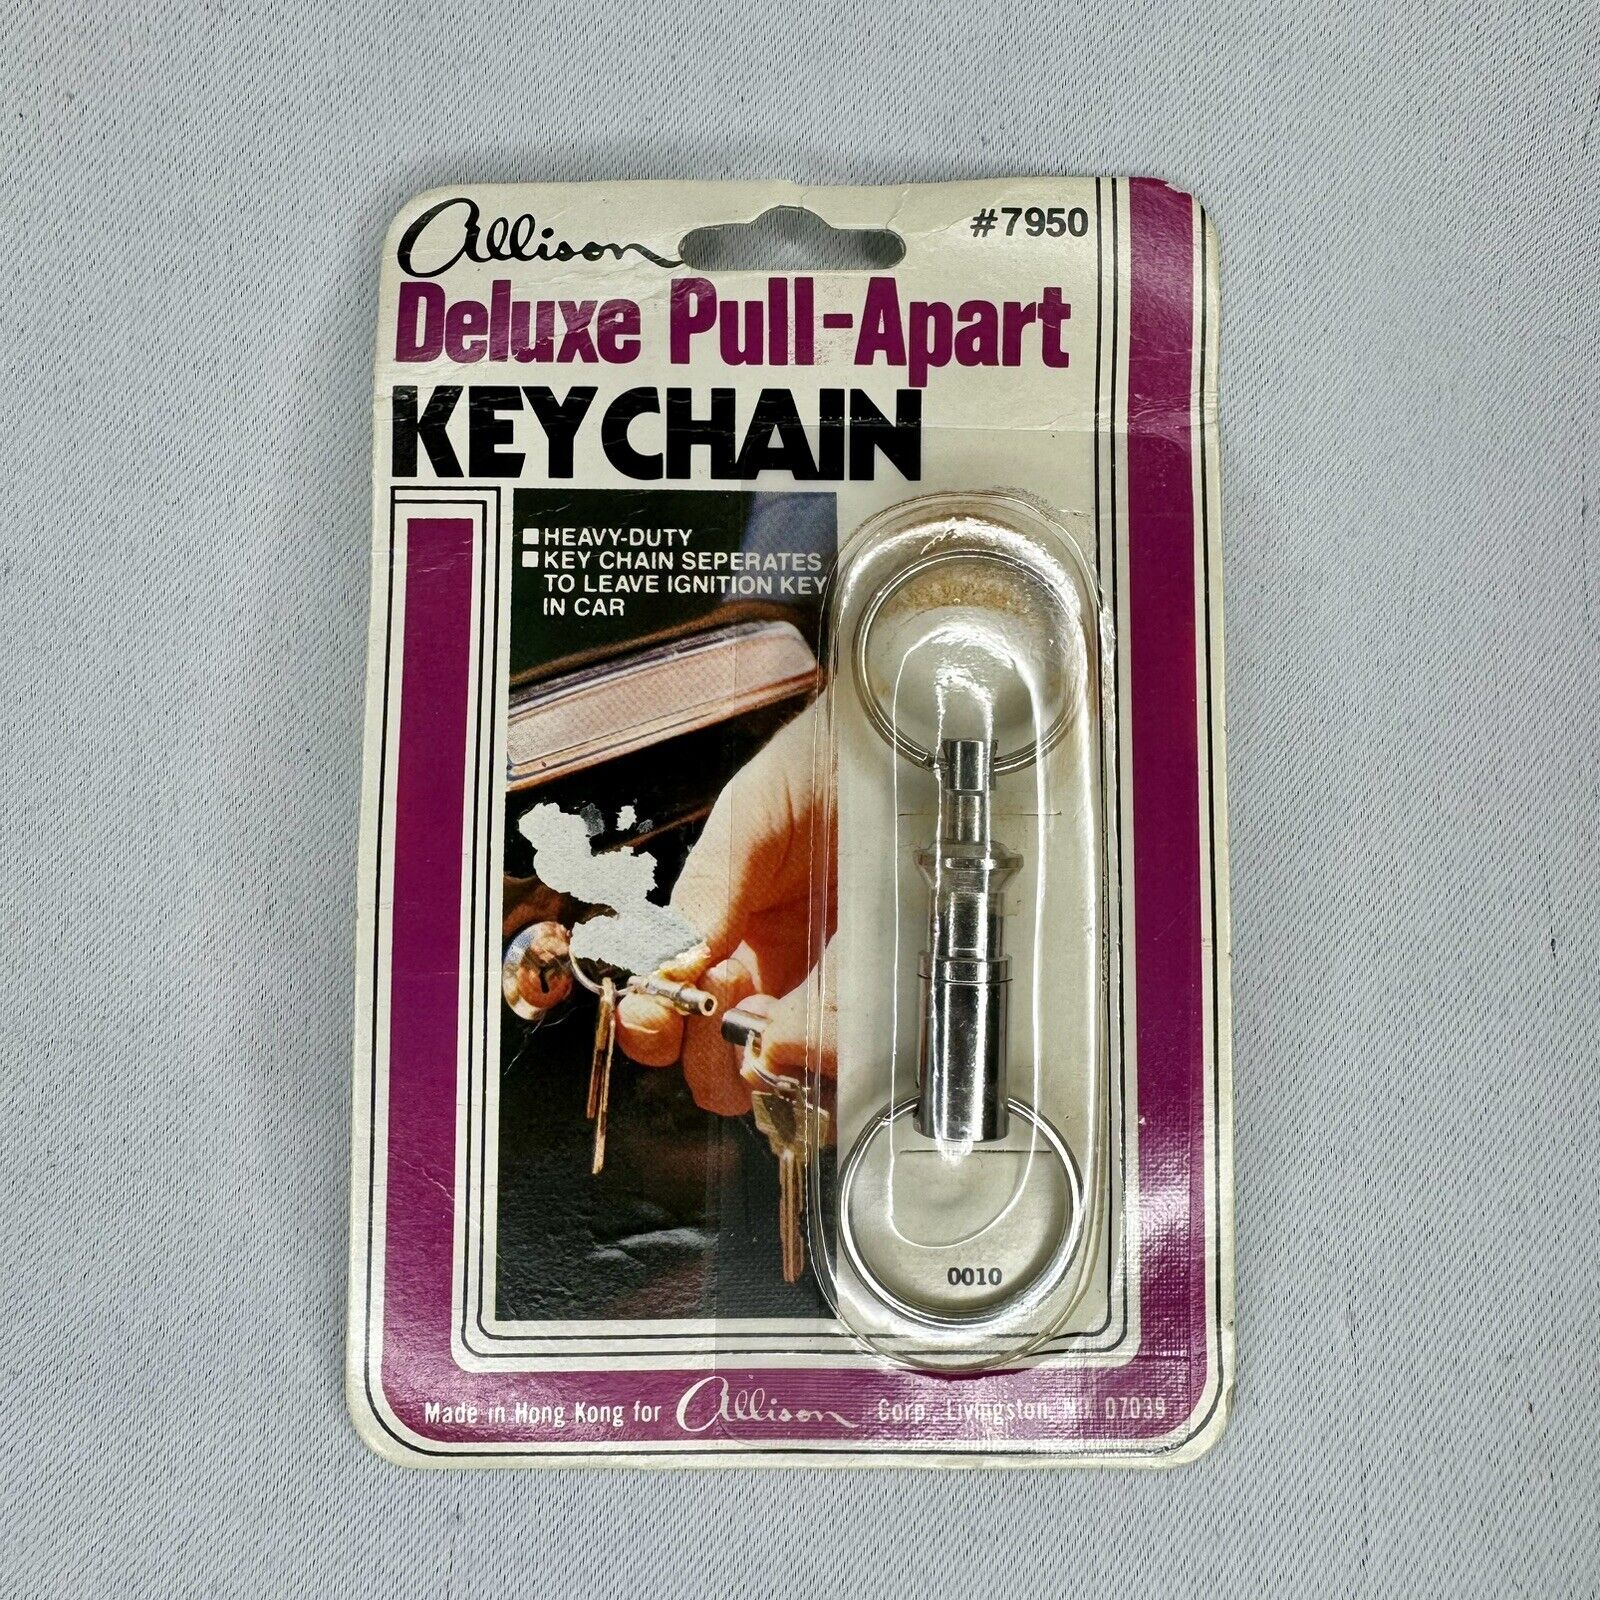 New Old Stock Vintage Allison Pull Apart Keychain Key Chain in Package